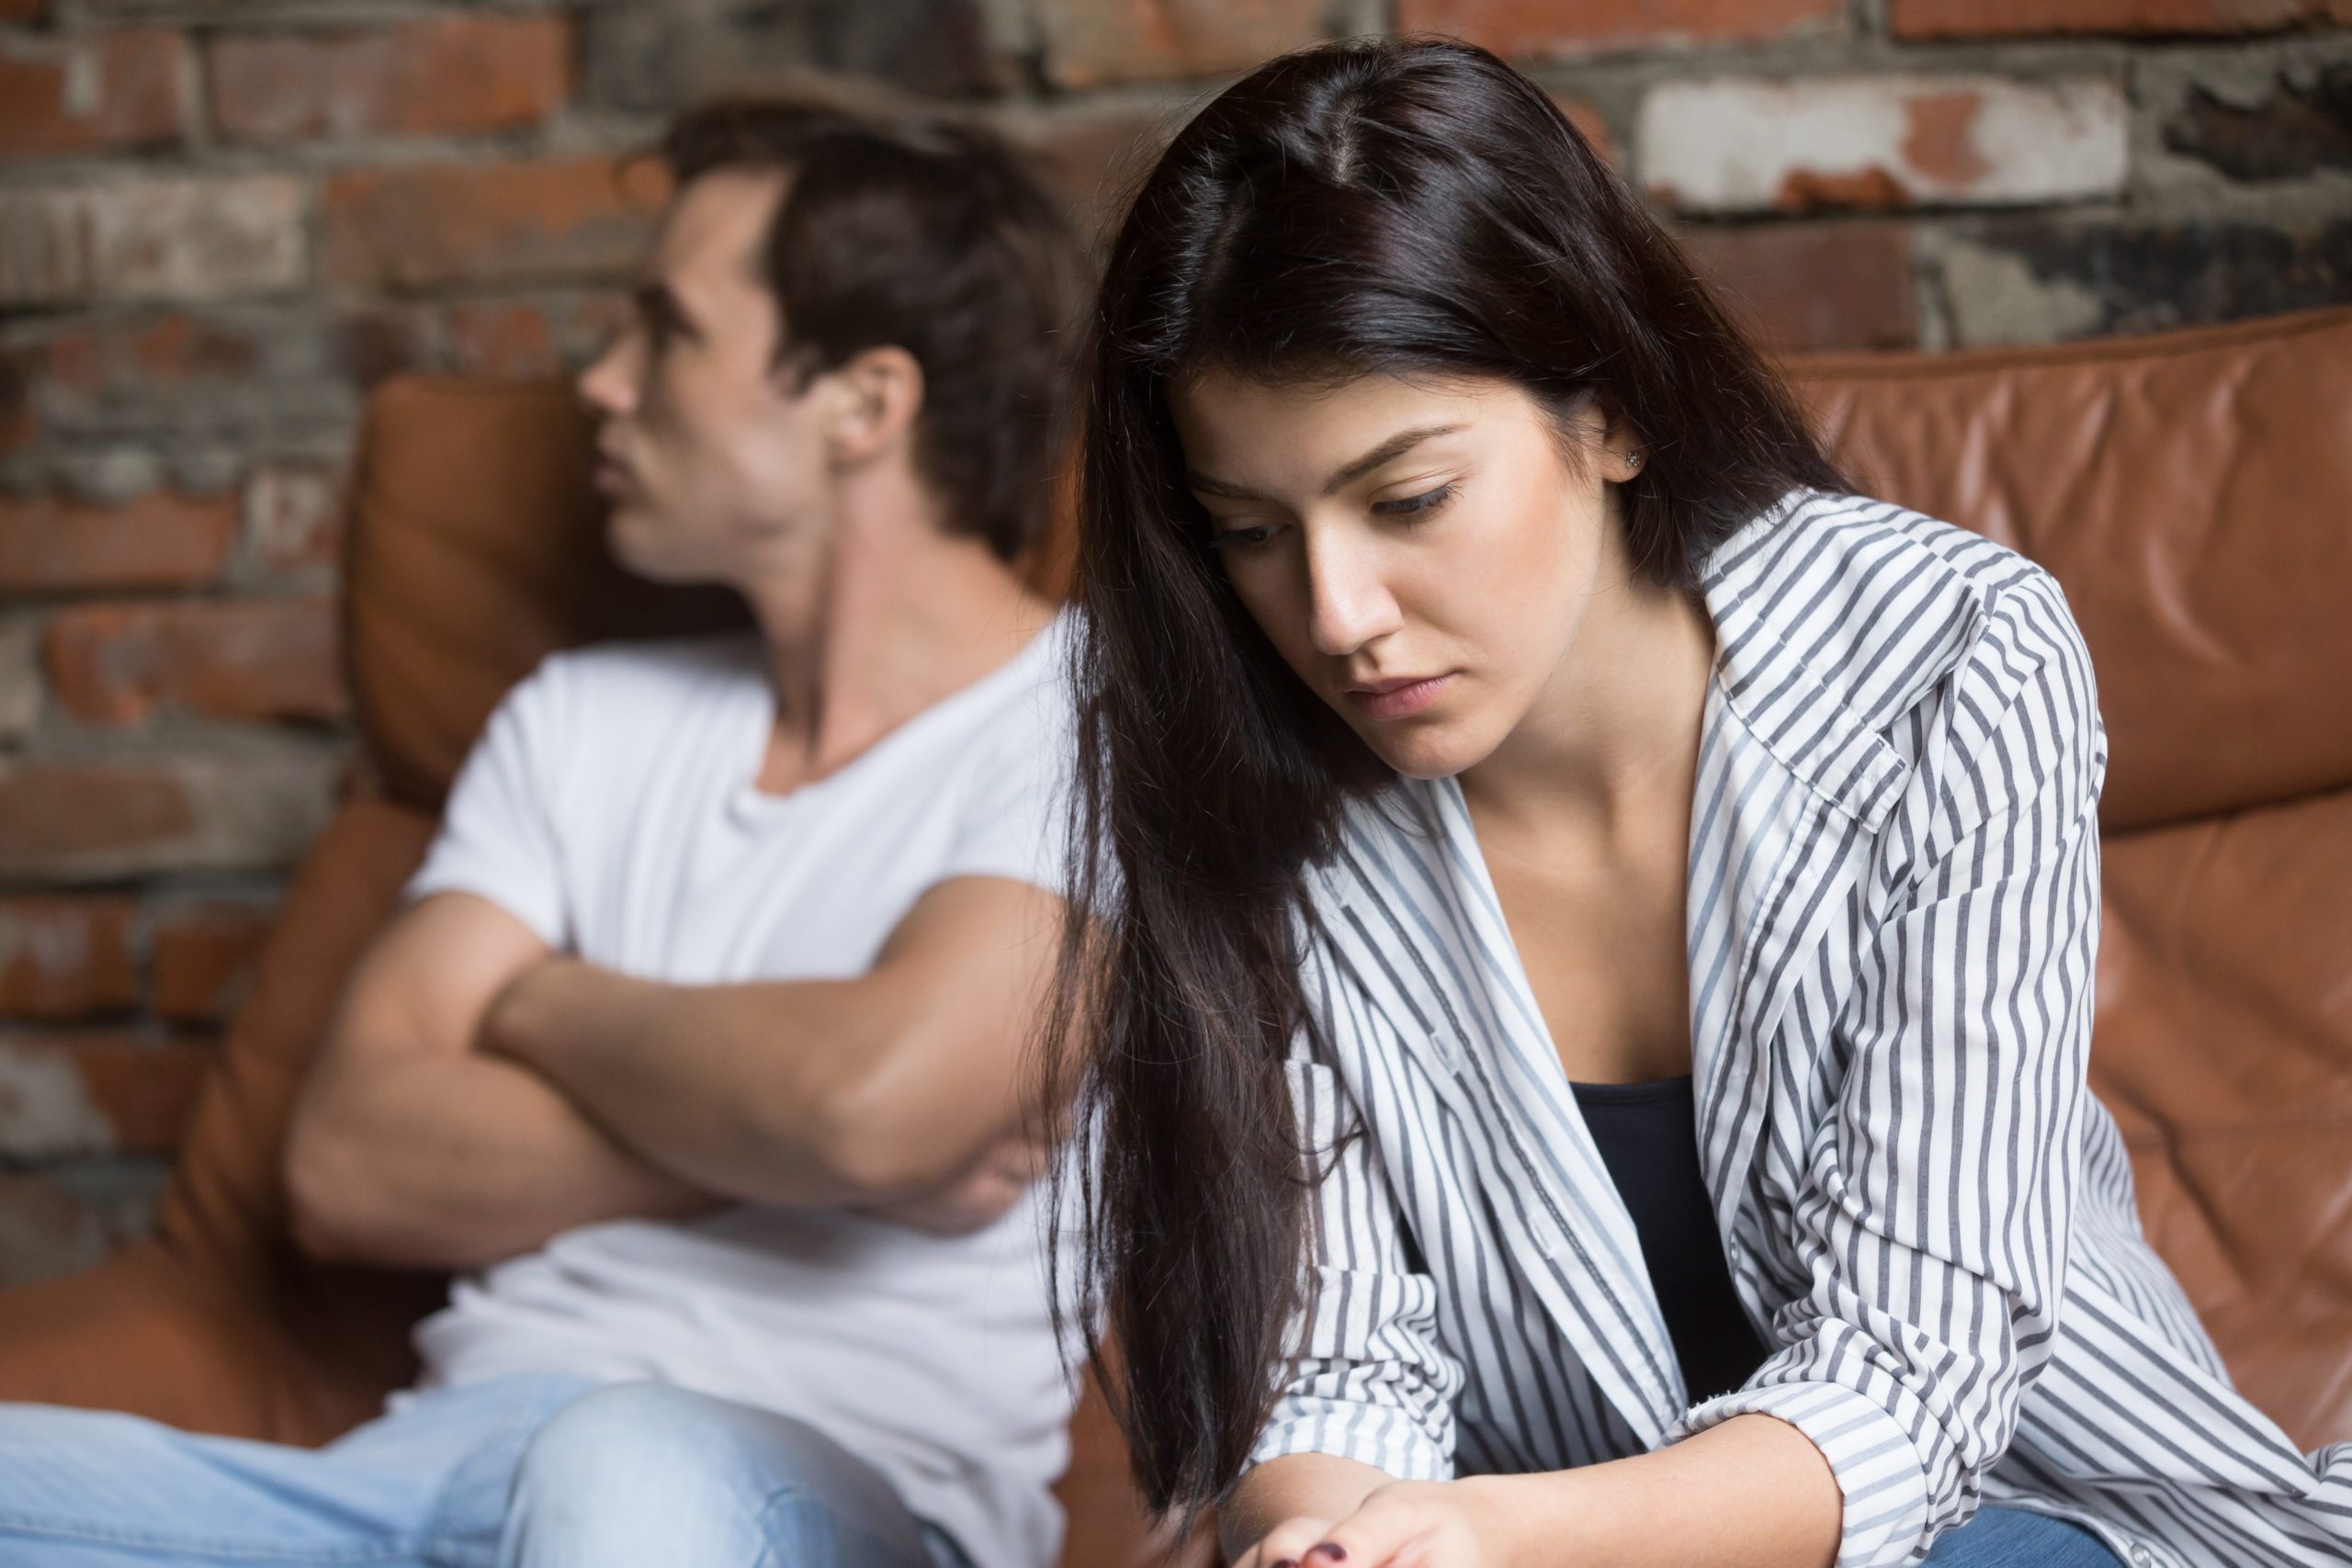 What Is Codependency in a Relationship With an Addict?